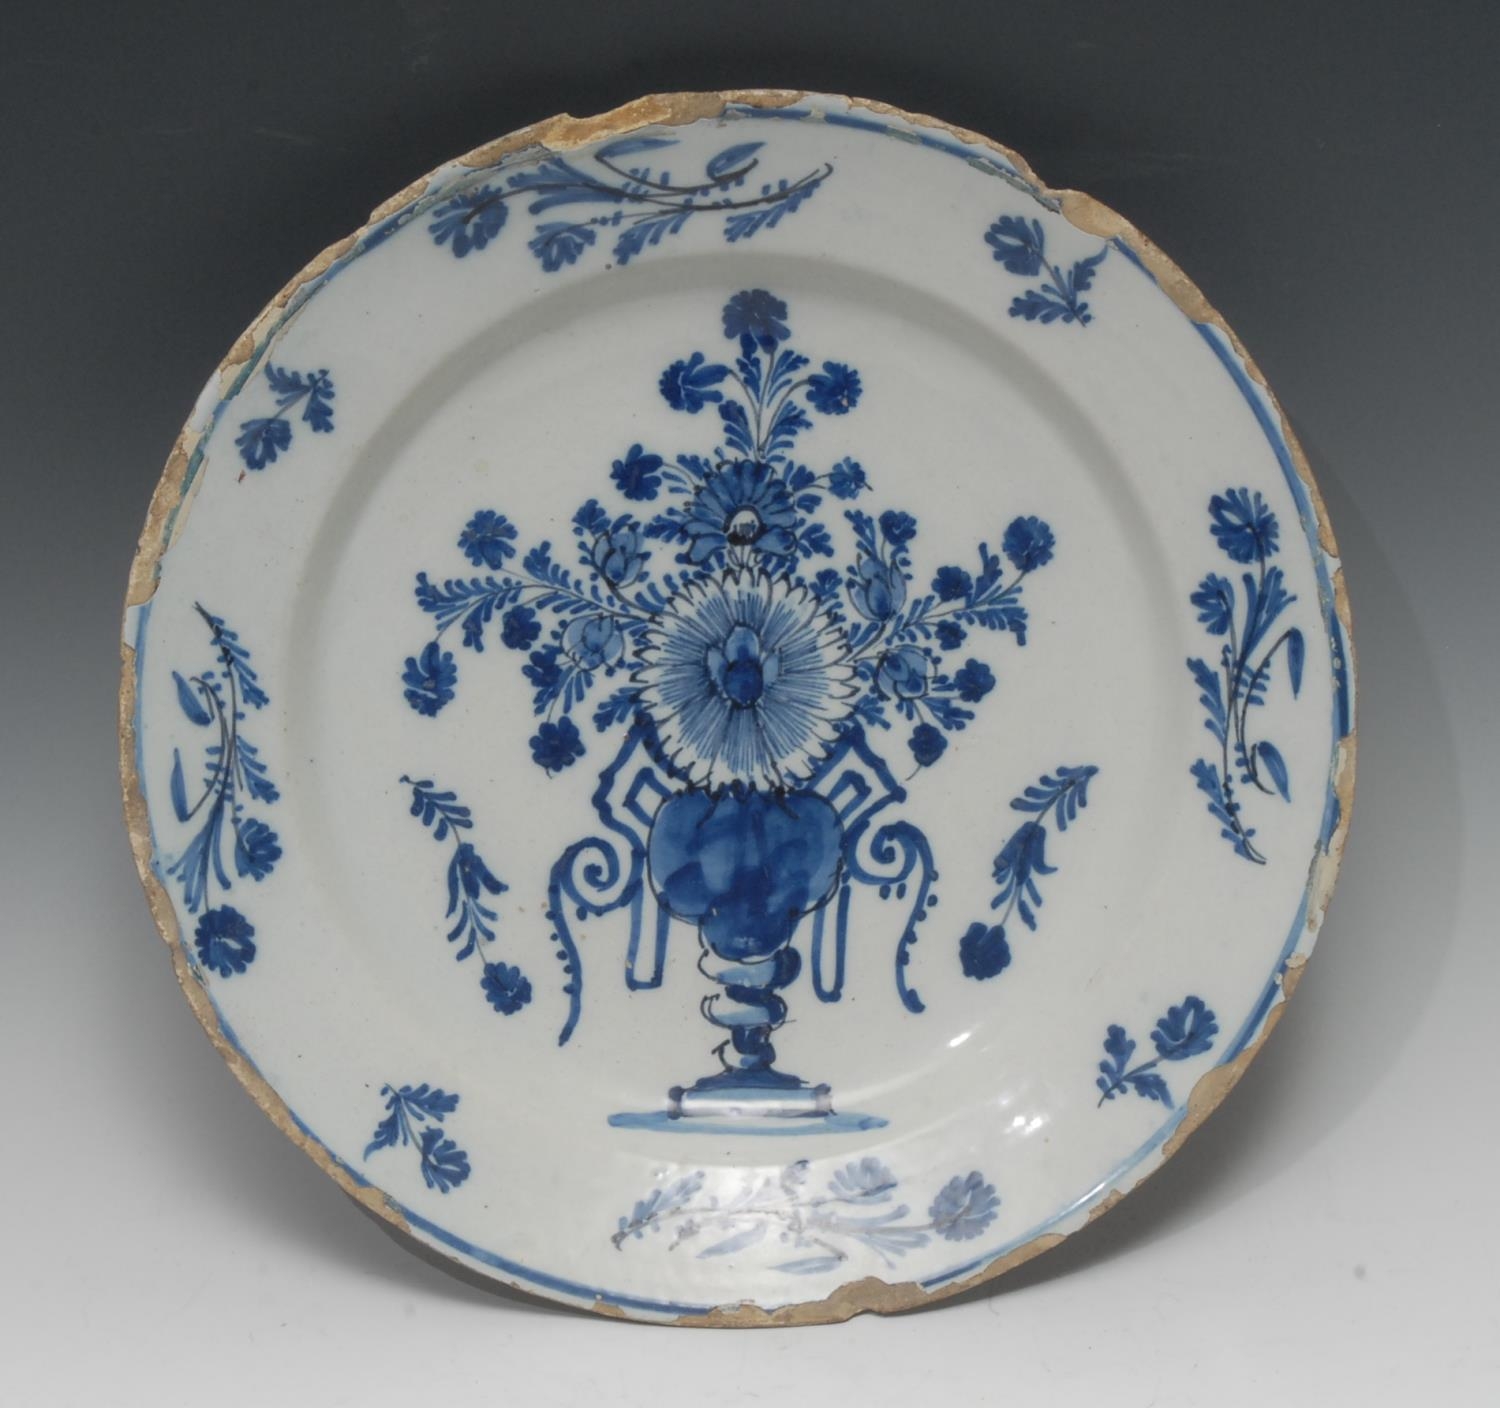 An early 18th century English Delft circular charger, painted in underglaze...